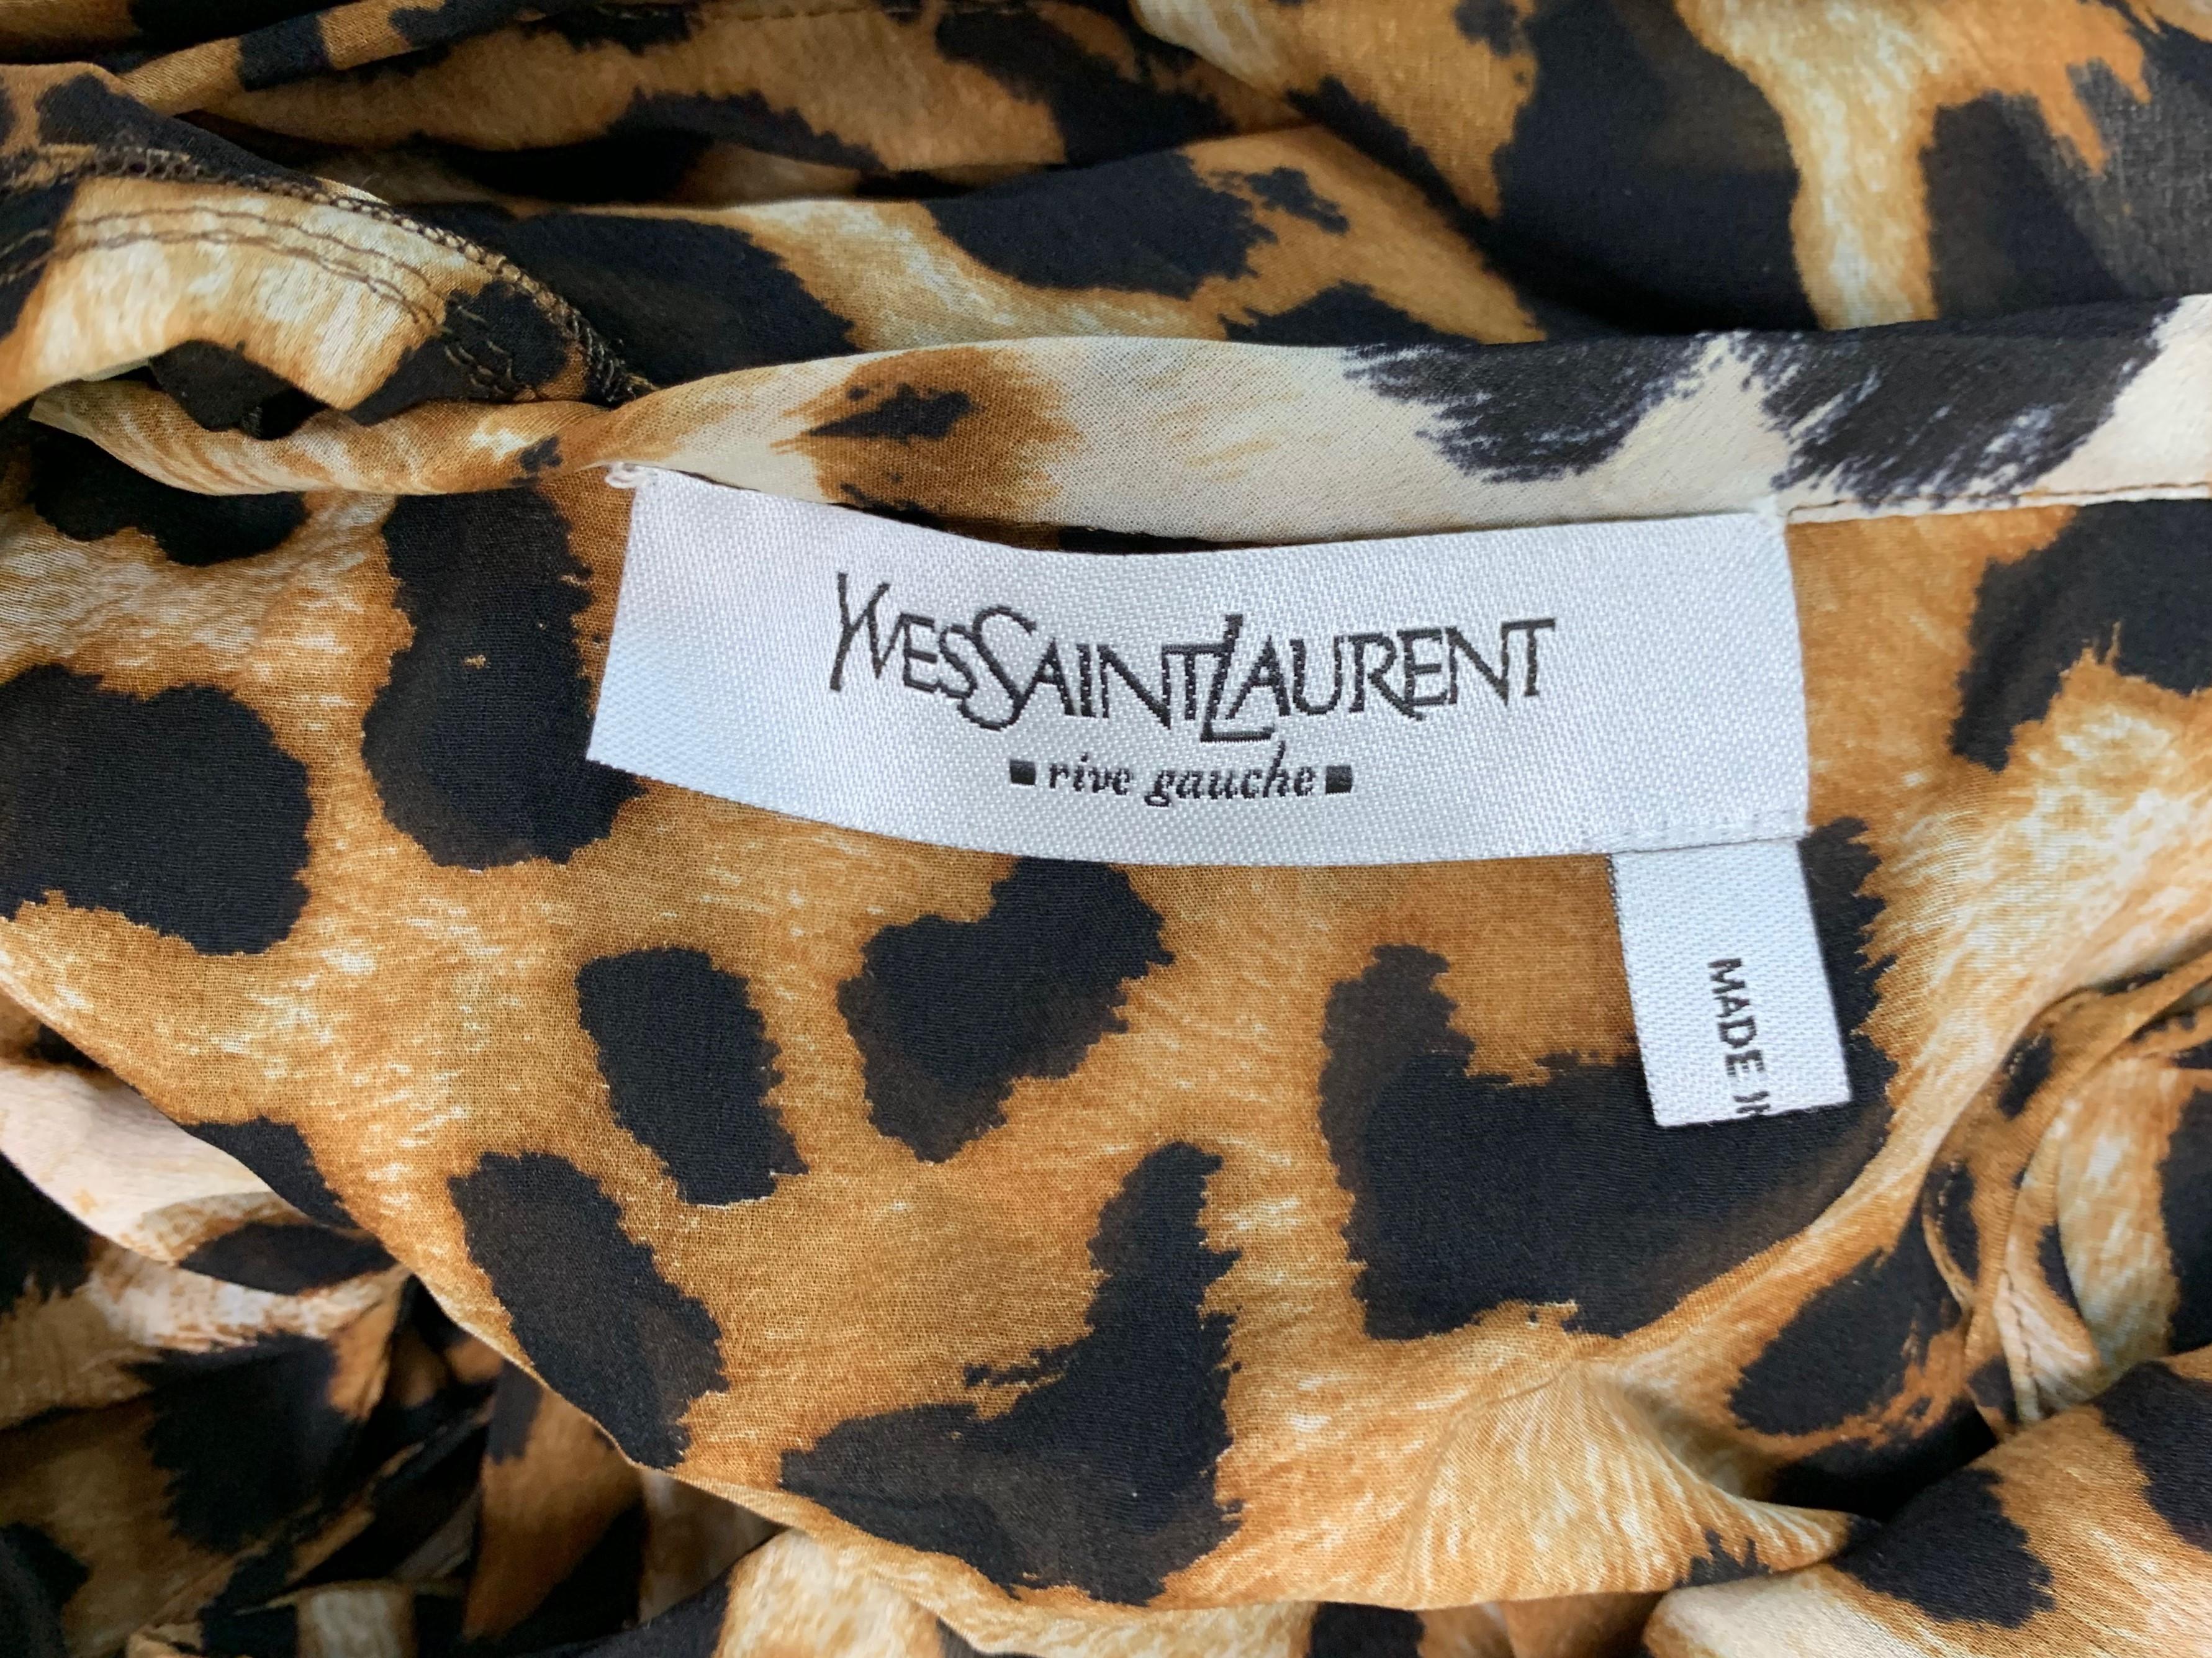 S/S 2002 Yves Saint Laurent Tom Ford Runway Leopard Silk Cut-Out Dress Gown In Good Condition In Yukon, OK